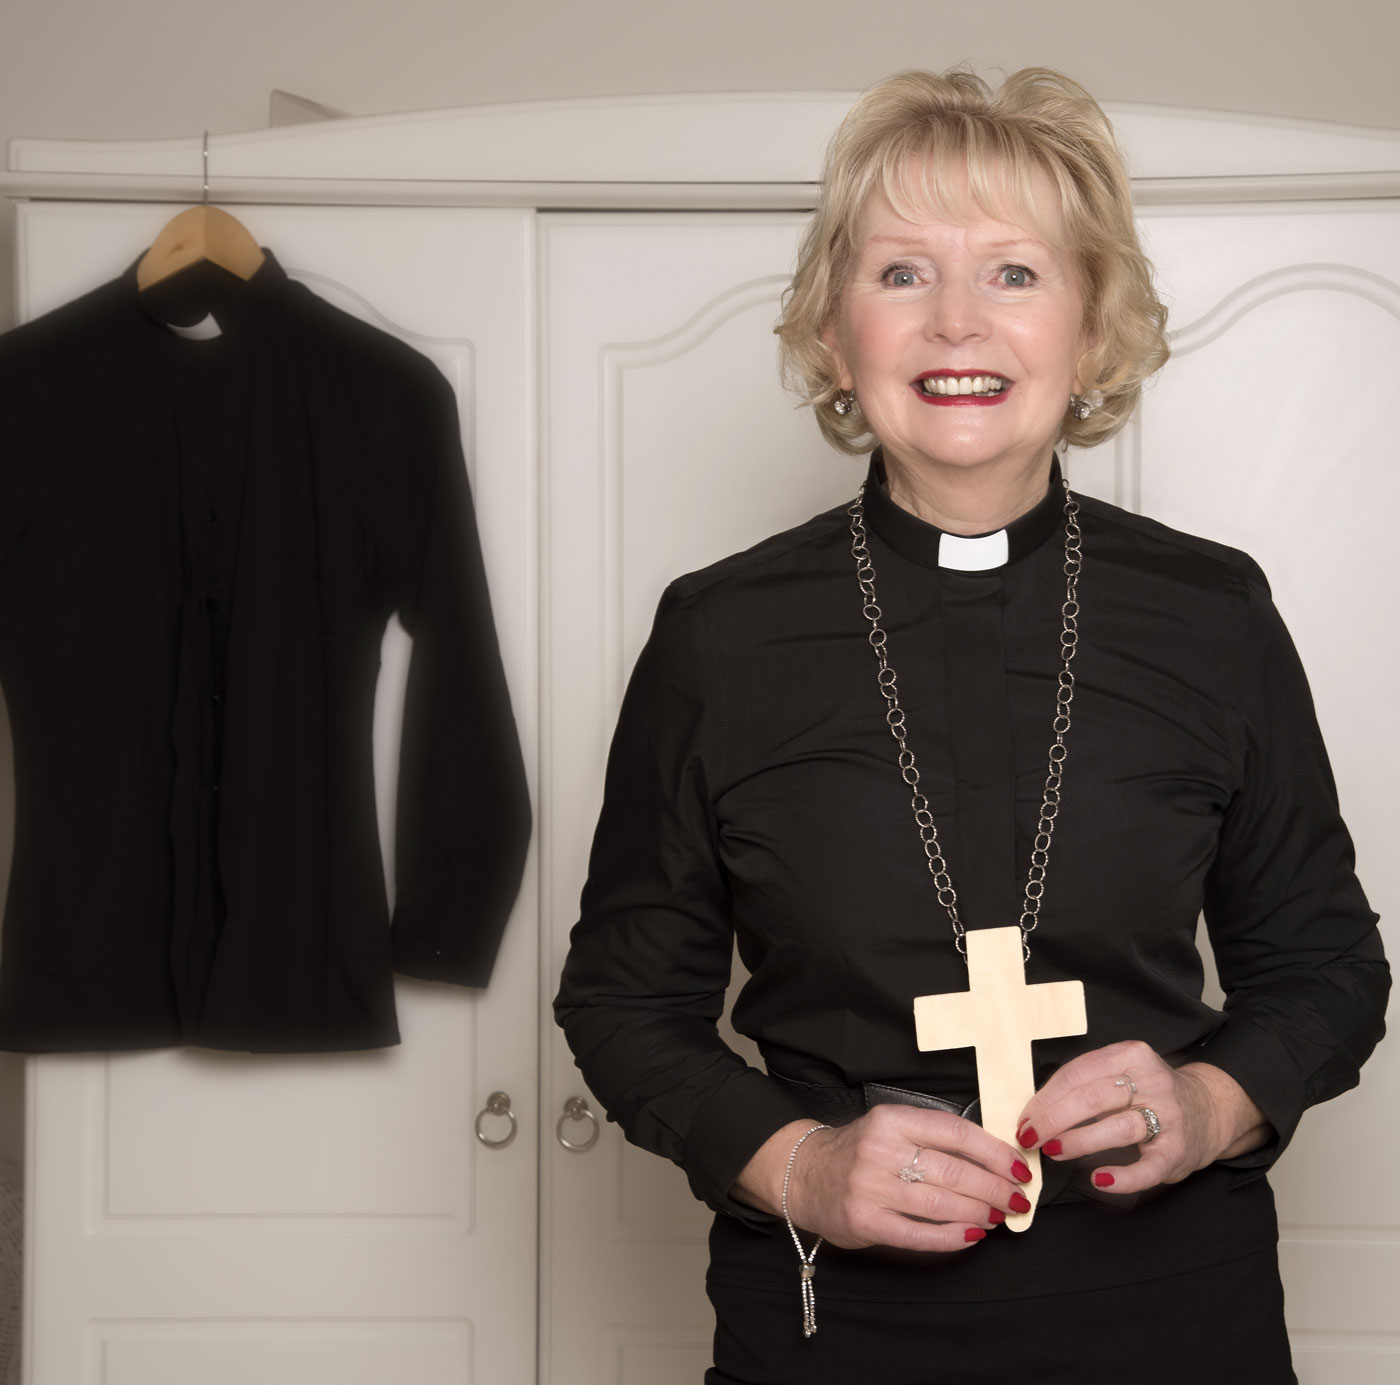 Clerical Clothing For Women